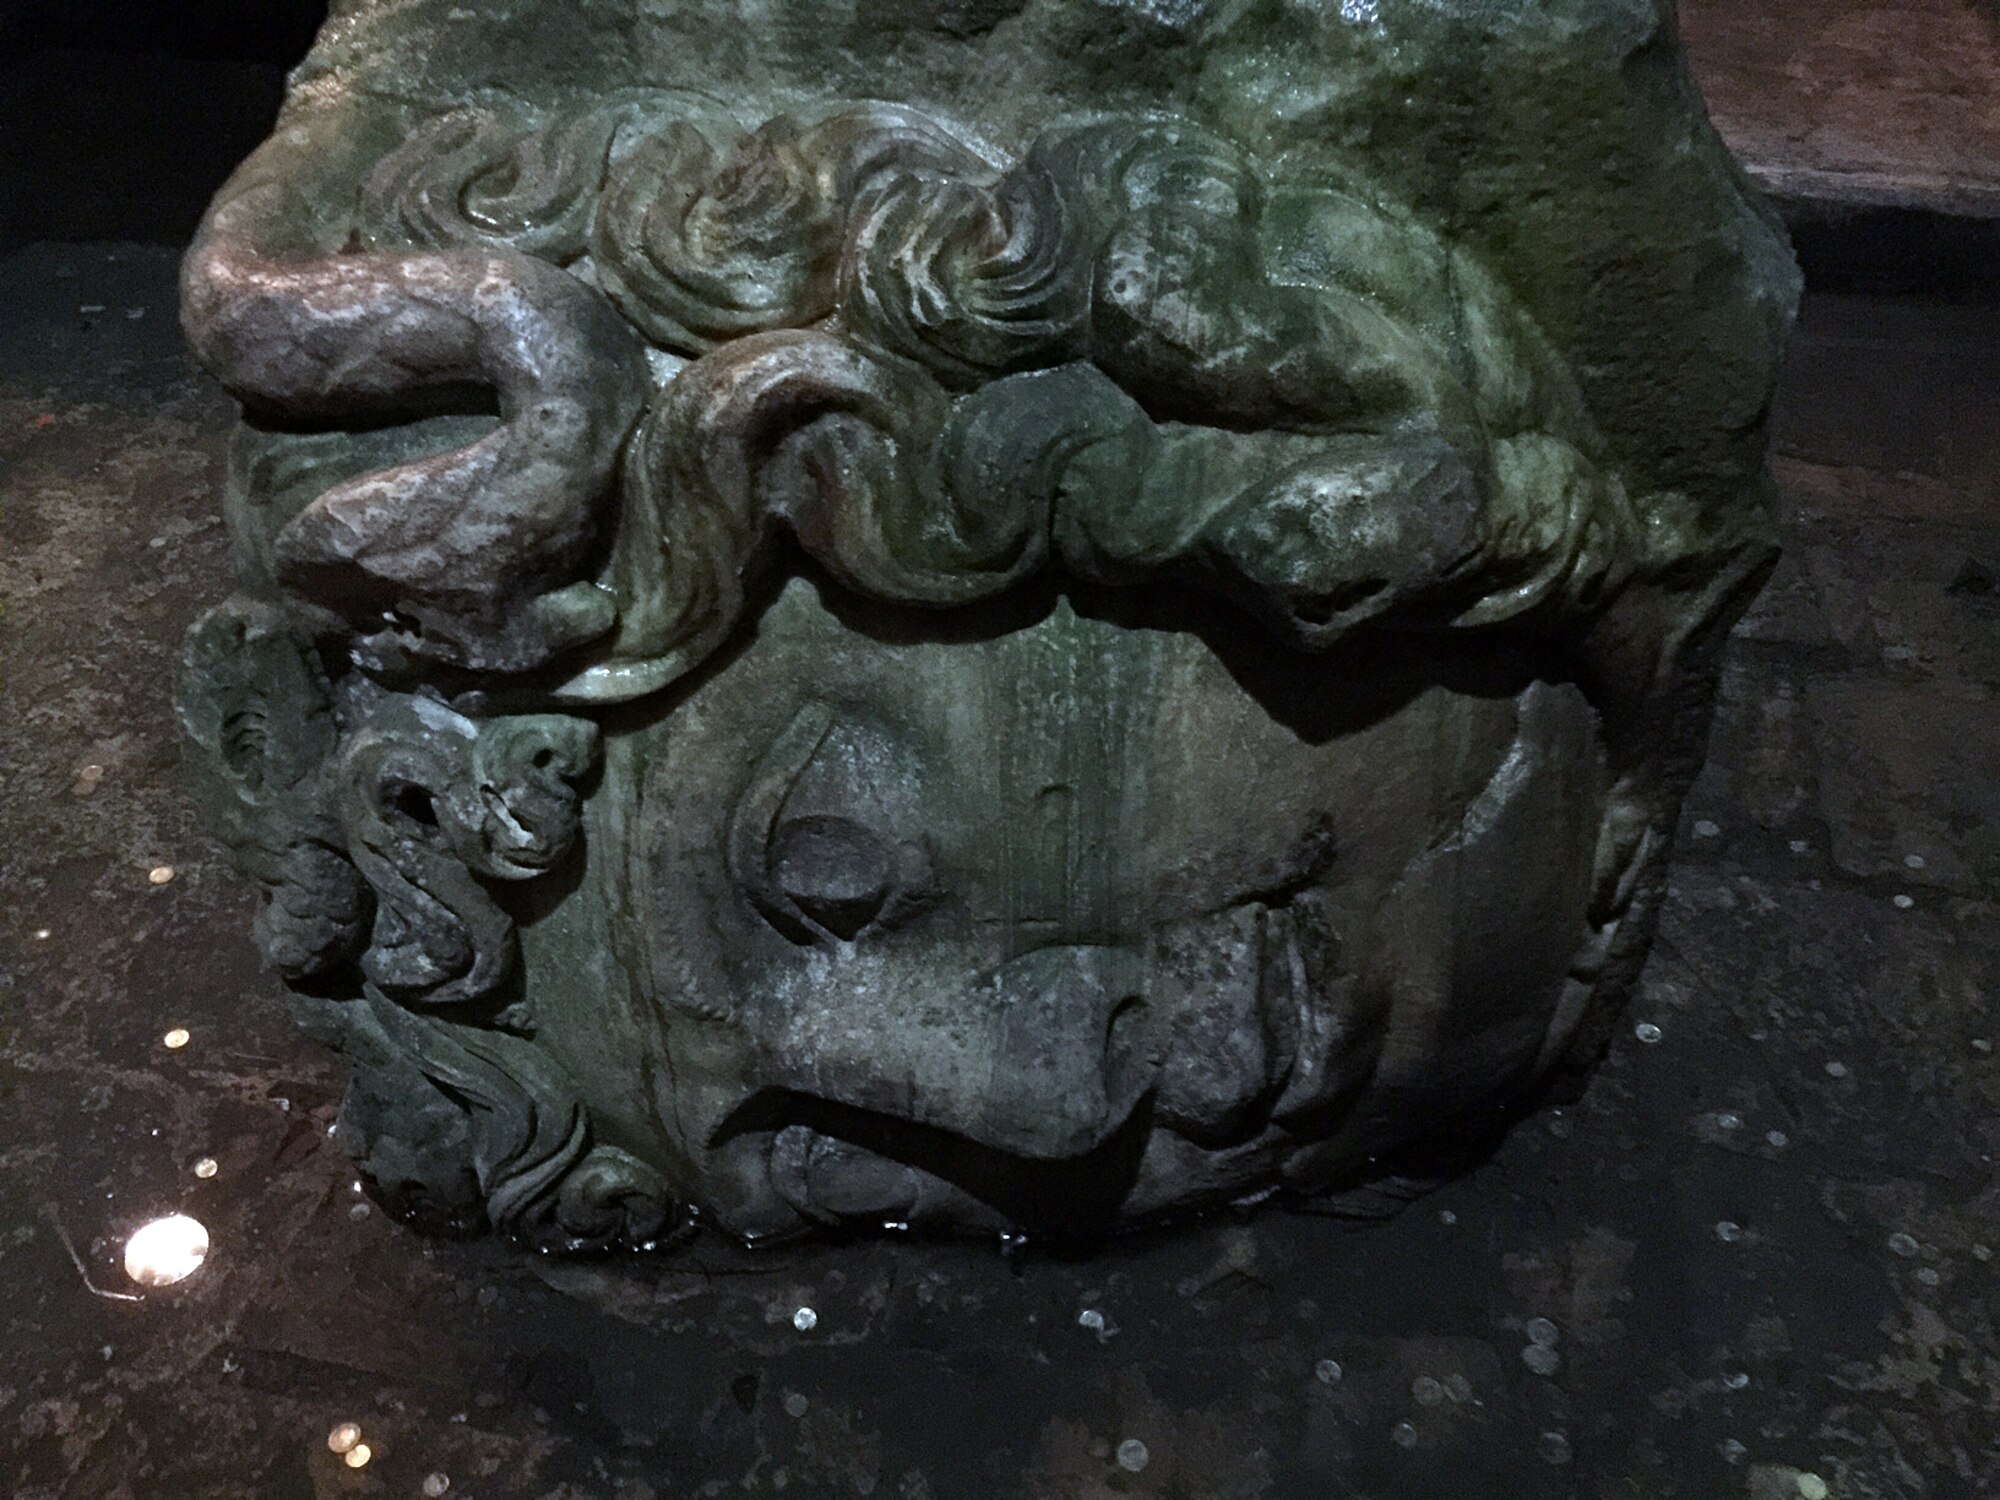 The Basilica Cistern, the largest cistern buried under the city of Istanbul, also hides two oversized emerald green Medusa heads. Of unknown origins, the heads are one of the most visited sites in Istanbul. (U.S. Air Force photo by Senior Airman Michael Battles/Released)